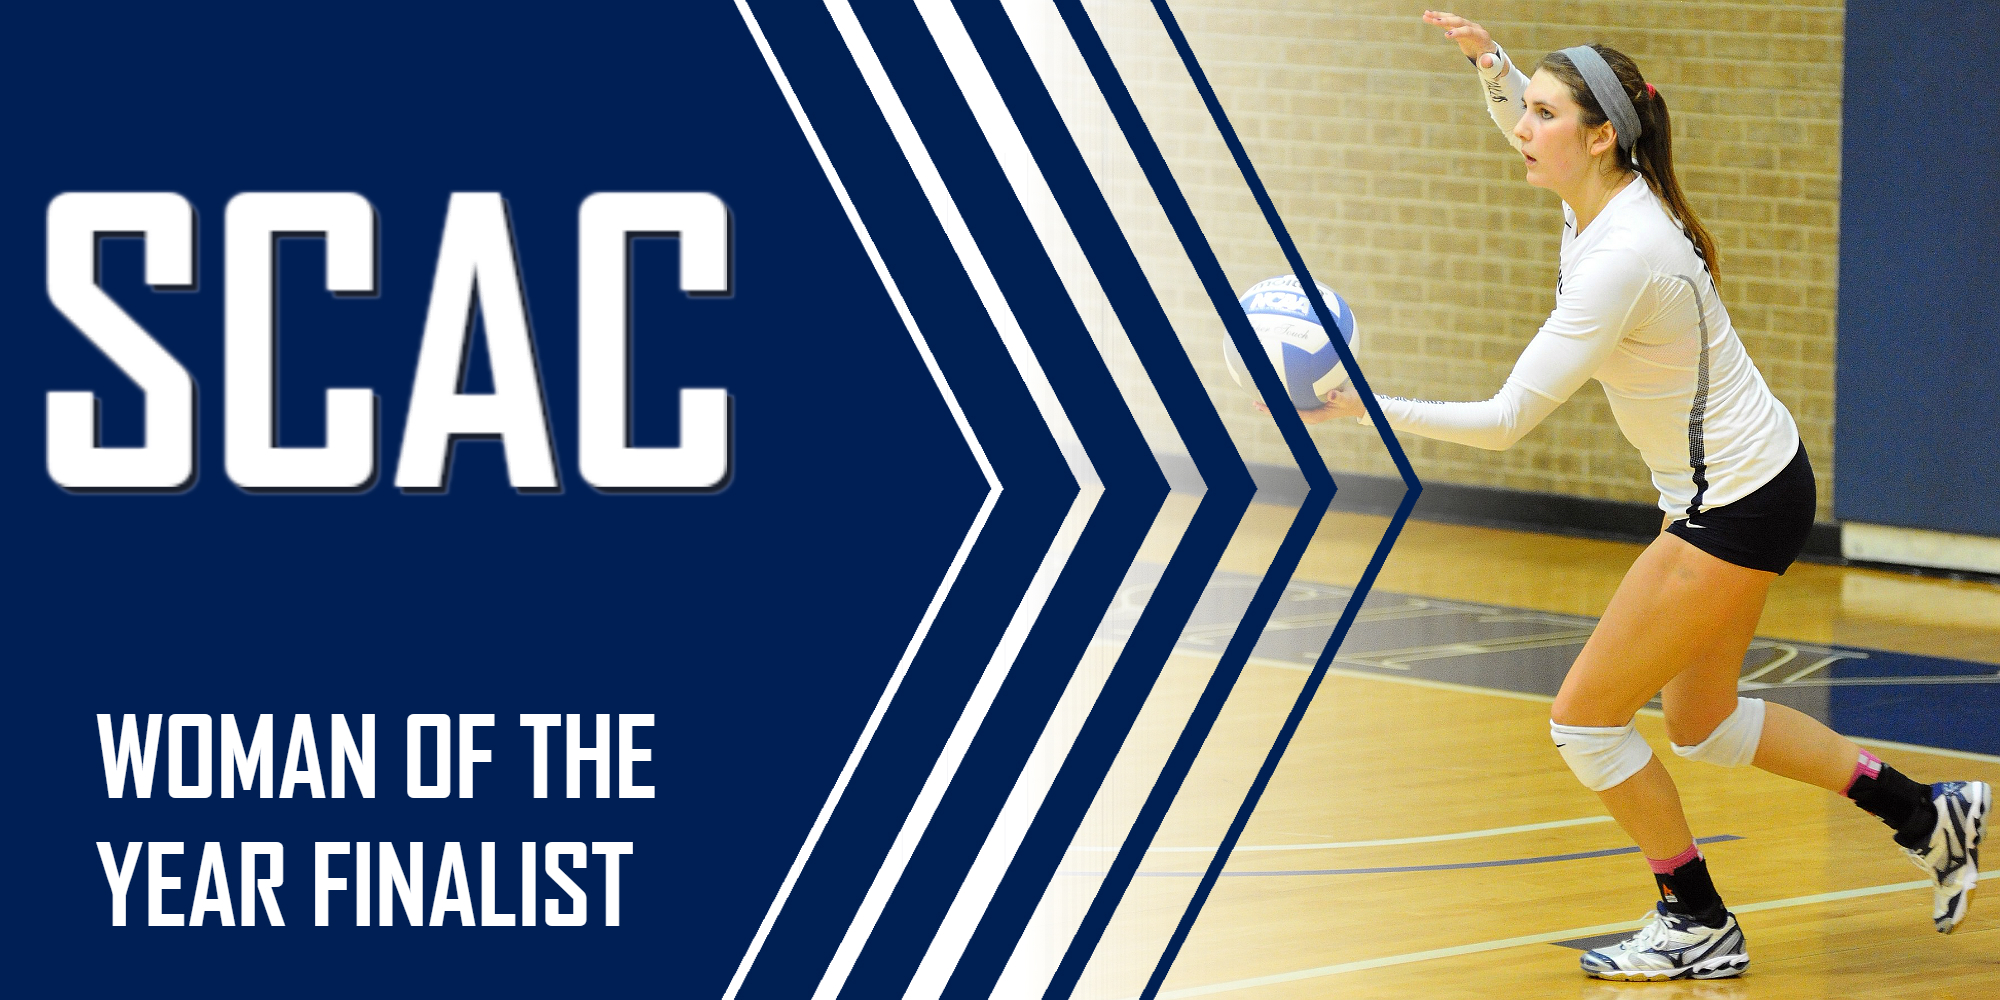 Koster a Finalist for SCAC Woman of the Year